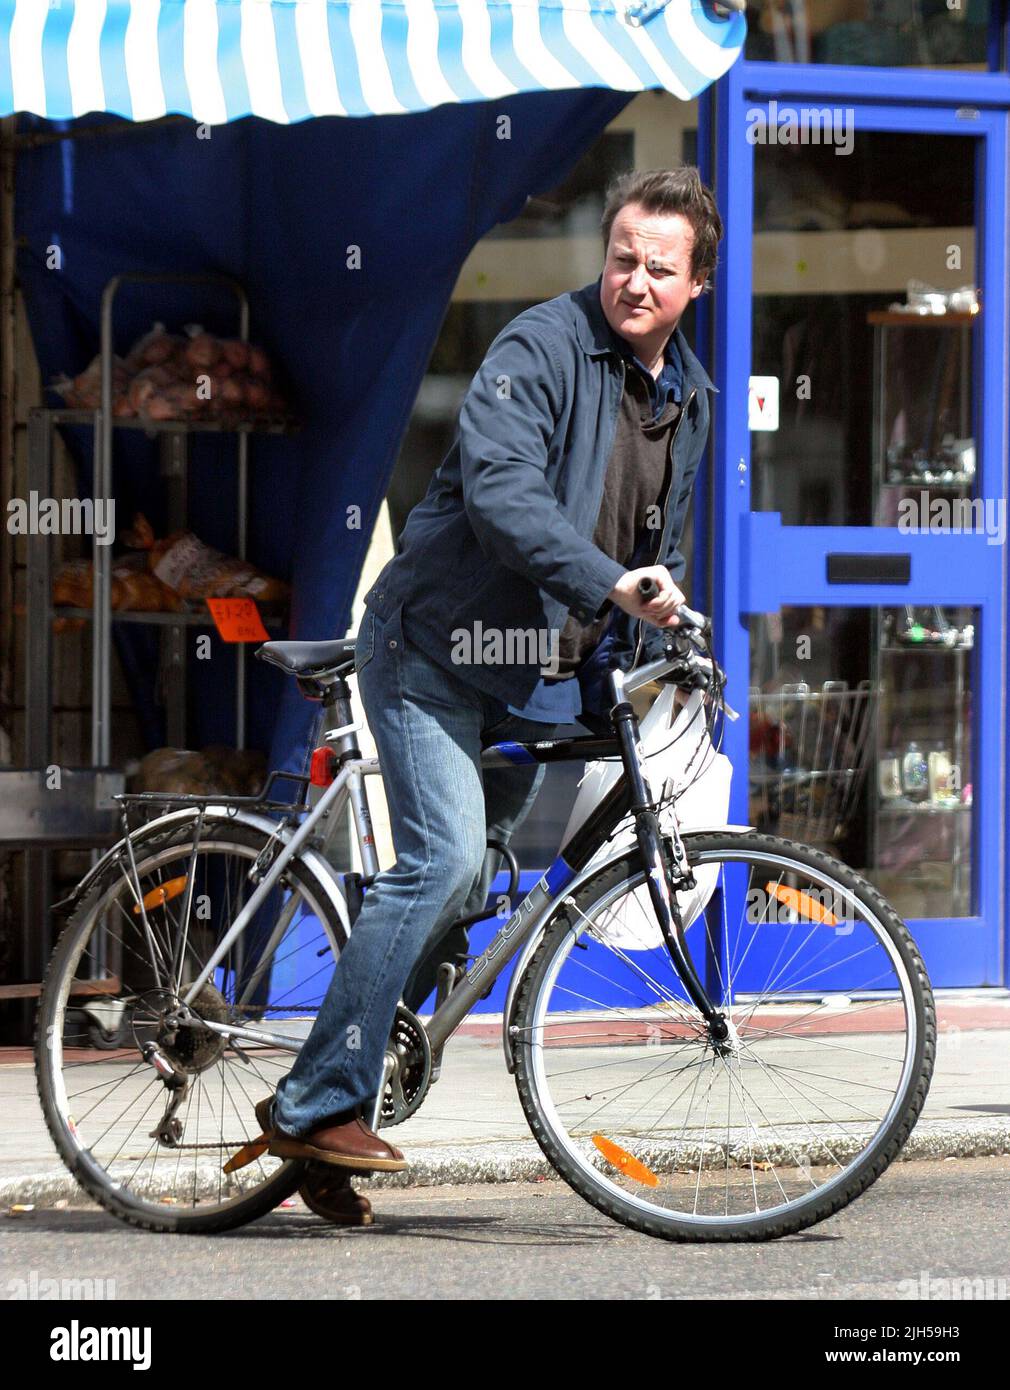 David Cameron is clearly a man of his word as he uses his bike to do the family grocery shopping at his local shops. Clearly not for Mr. Cameron is the 'celebrity style' supermarket style deliveries as the 'modern man' loads his bike in a true left/right balancing act as he swung to right infront of a juuggernaut! Next time maybe a set of cycling safety gear might be appropriate. Picture by Tony Henshaw Stock Photo